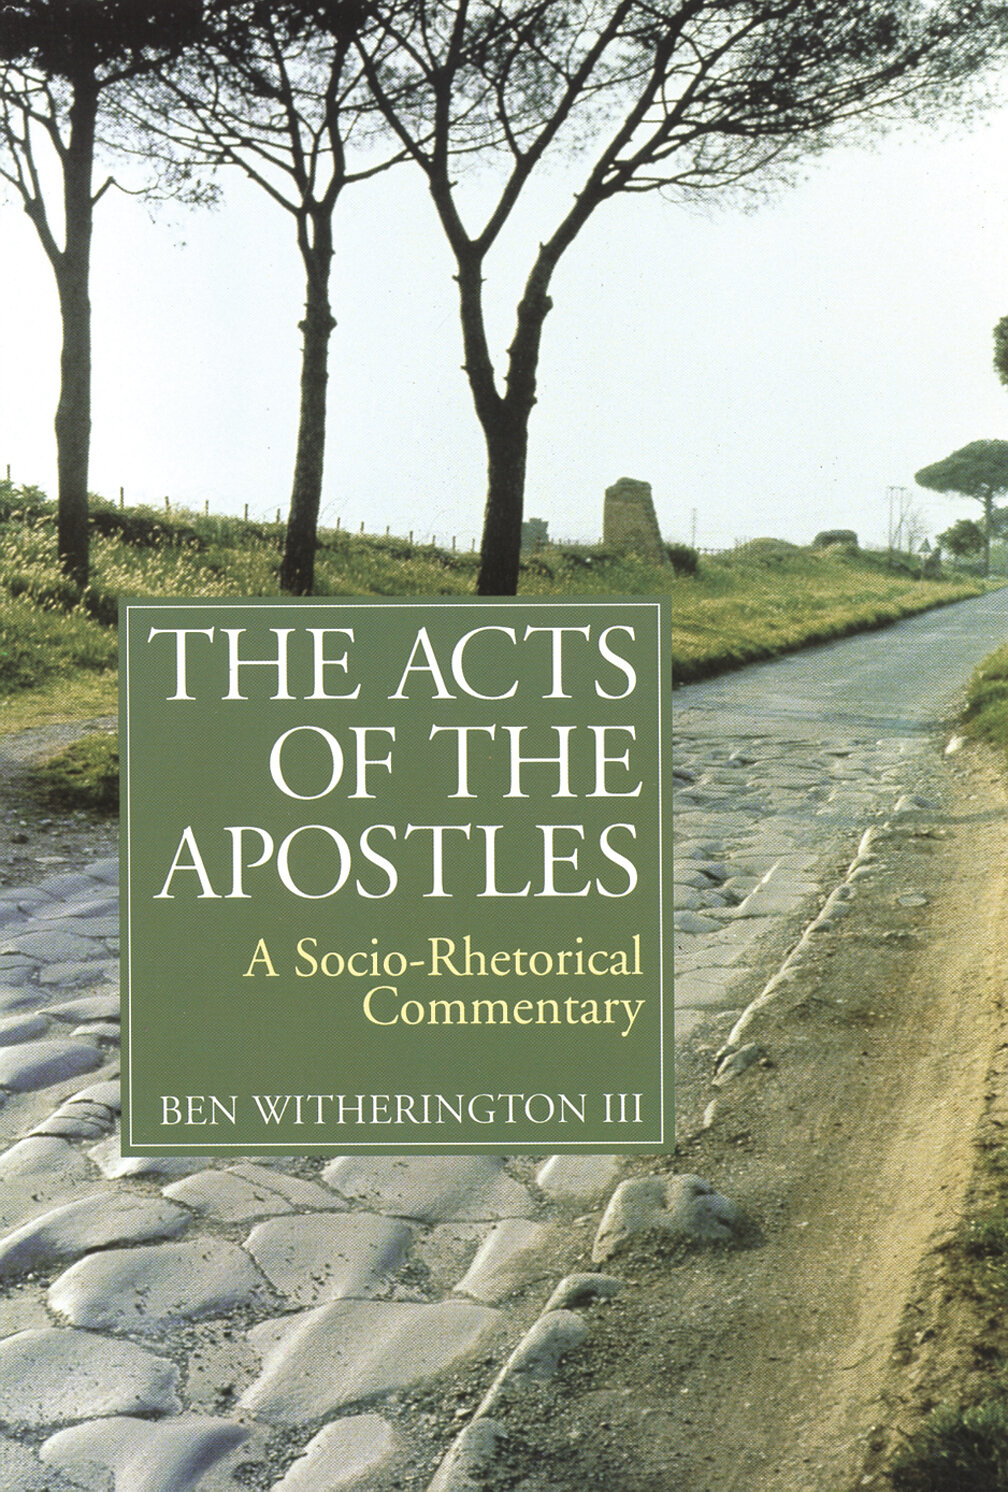 The Acts of the Apostles: A Socio-Rhetorical Commentary